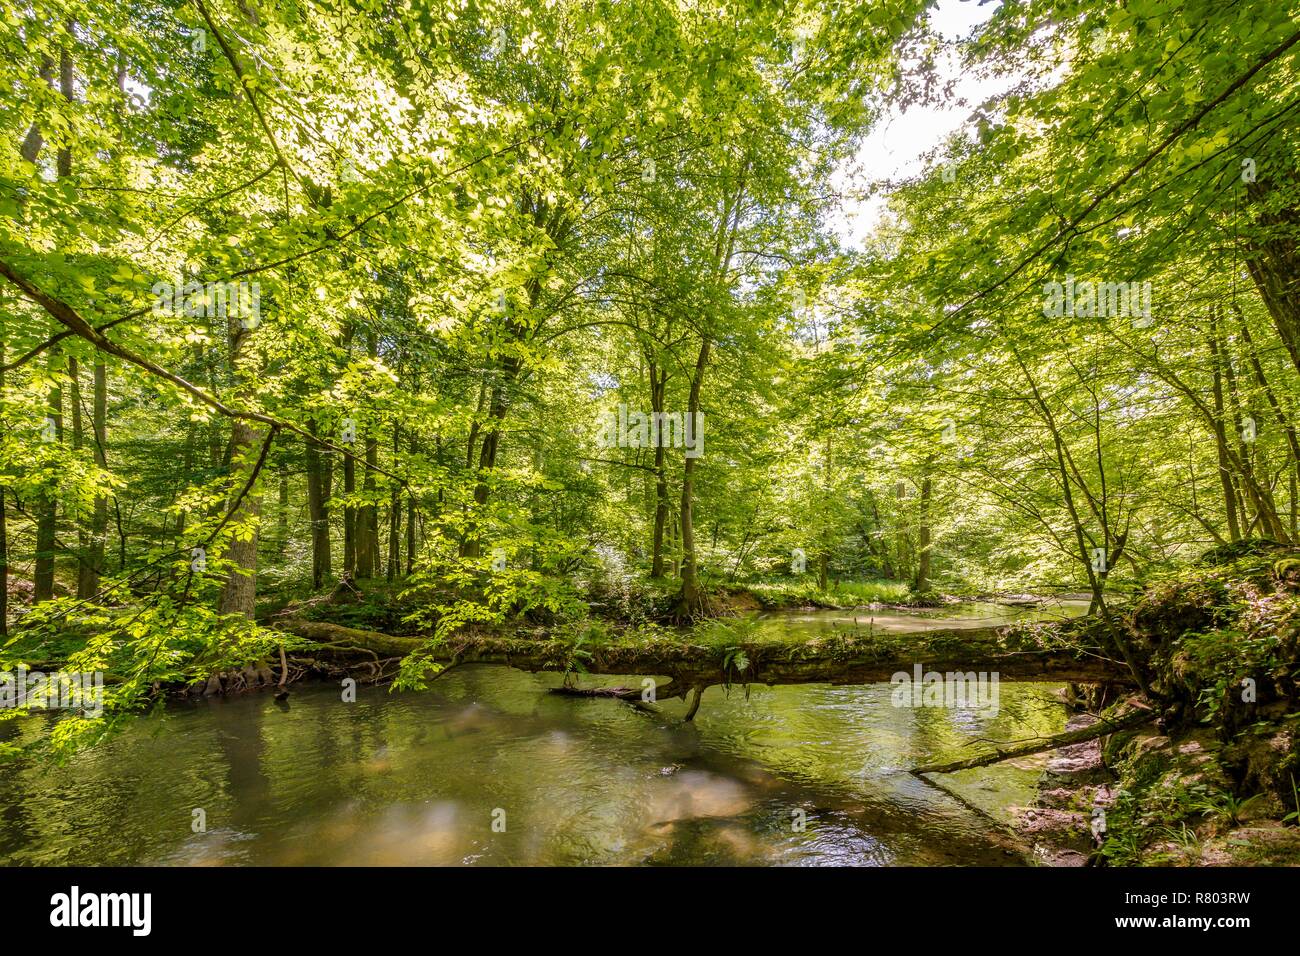 A beautiful green forest, above a calmly flowing river, illuminated by the rays of the spring sun. Polish Warmian Forest Reserve, around Olsztyn. Stock Photo